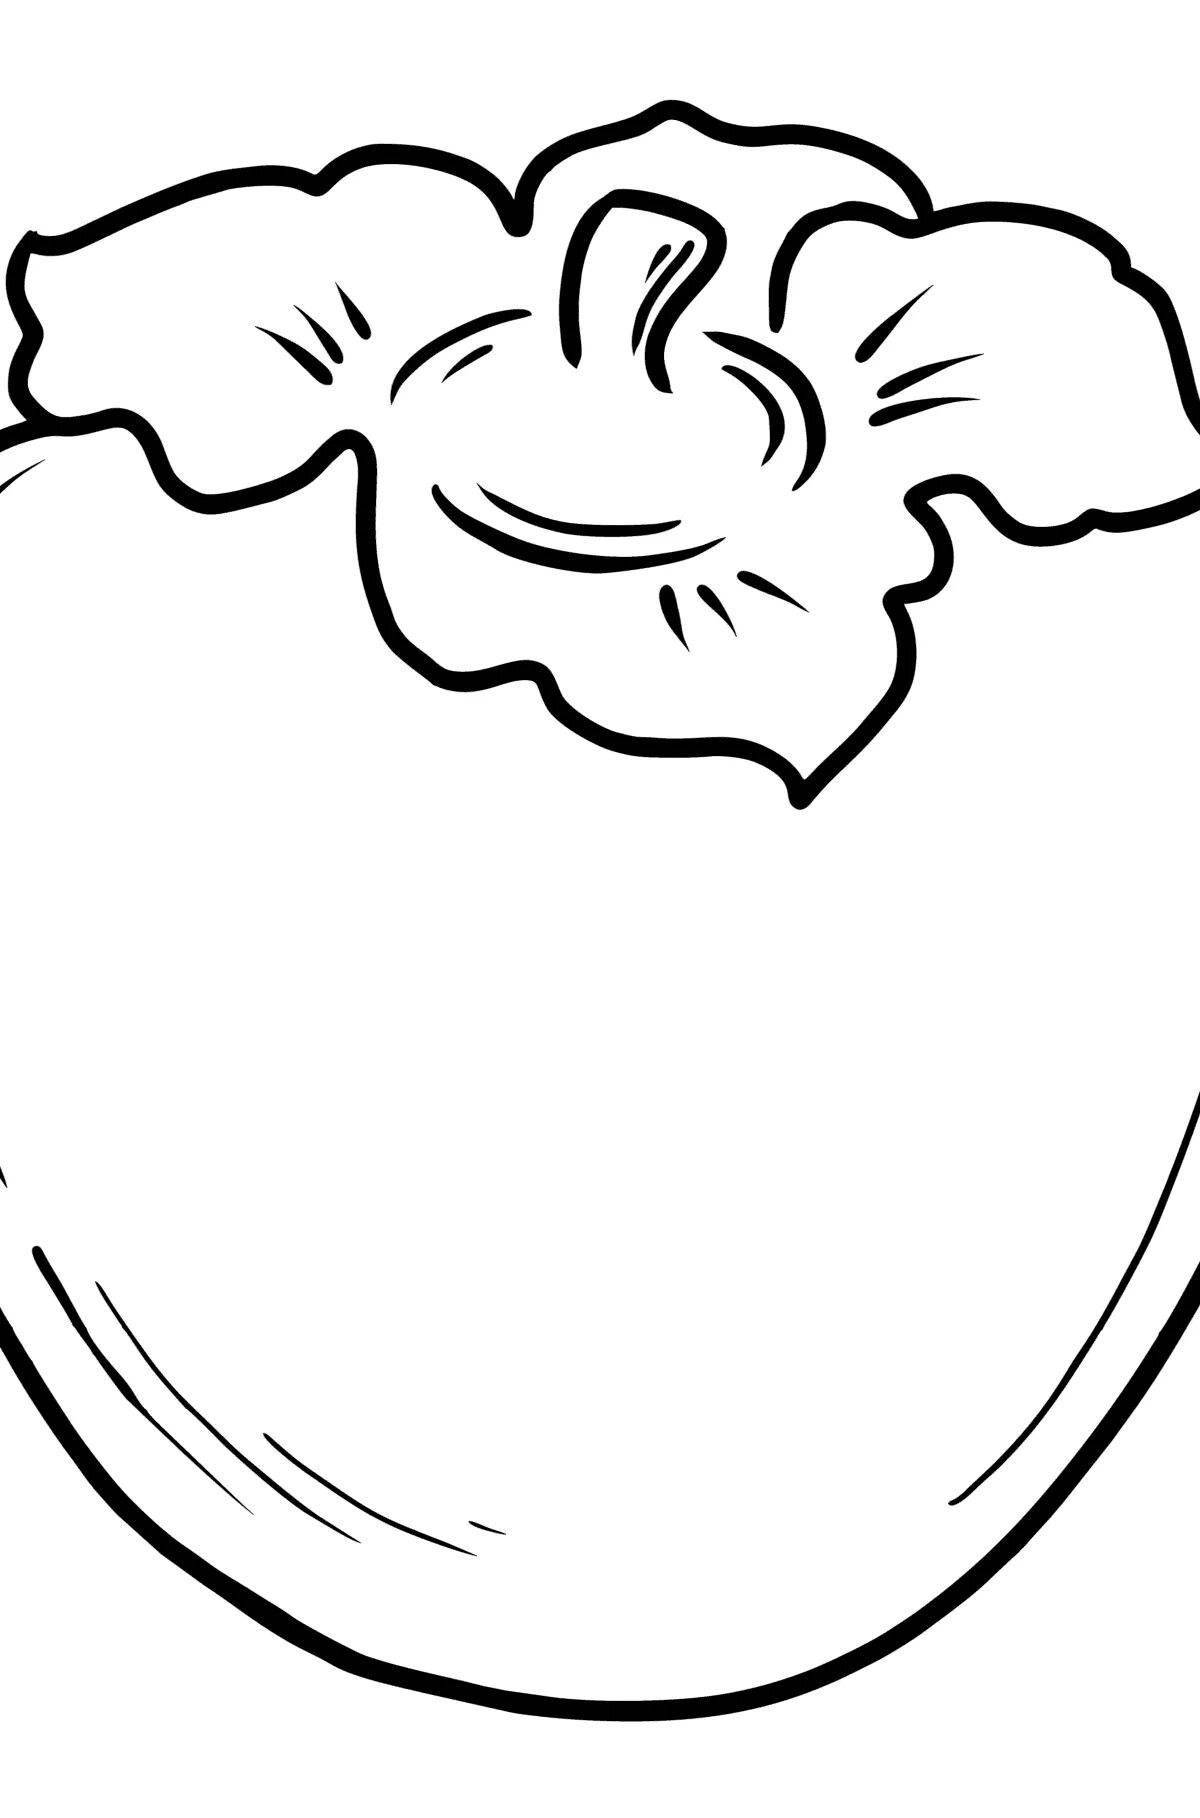 Amazing persimmon coloring page for kids